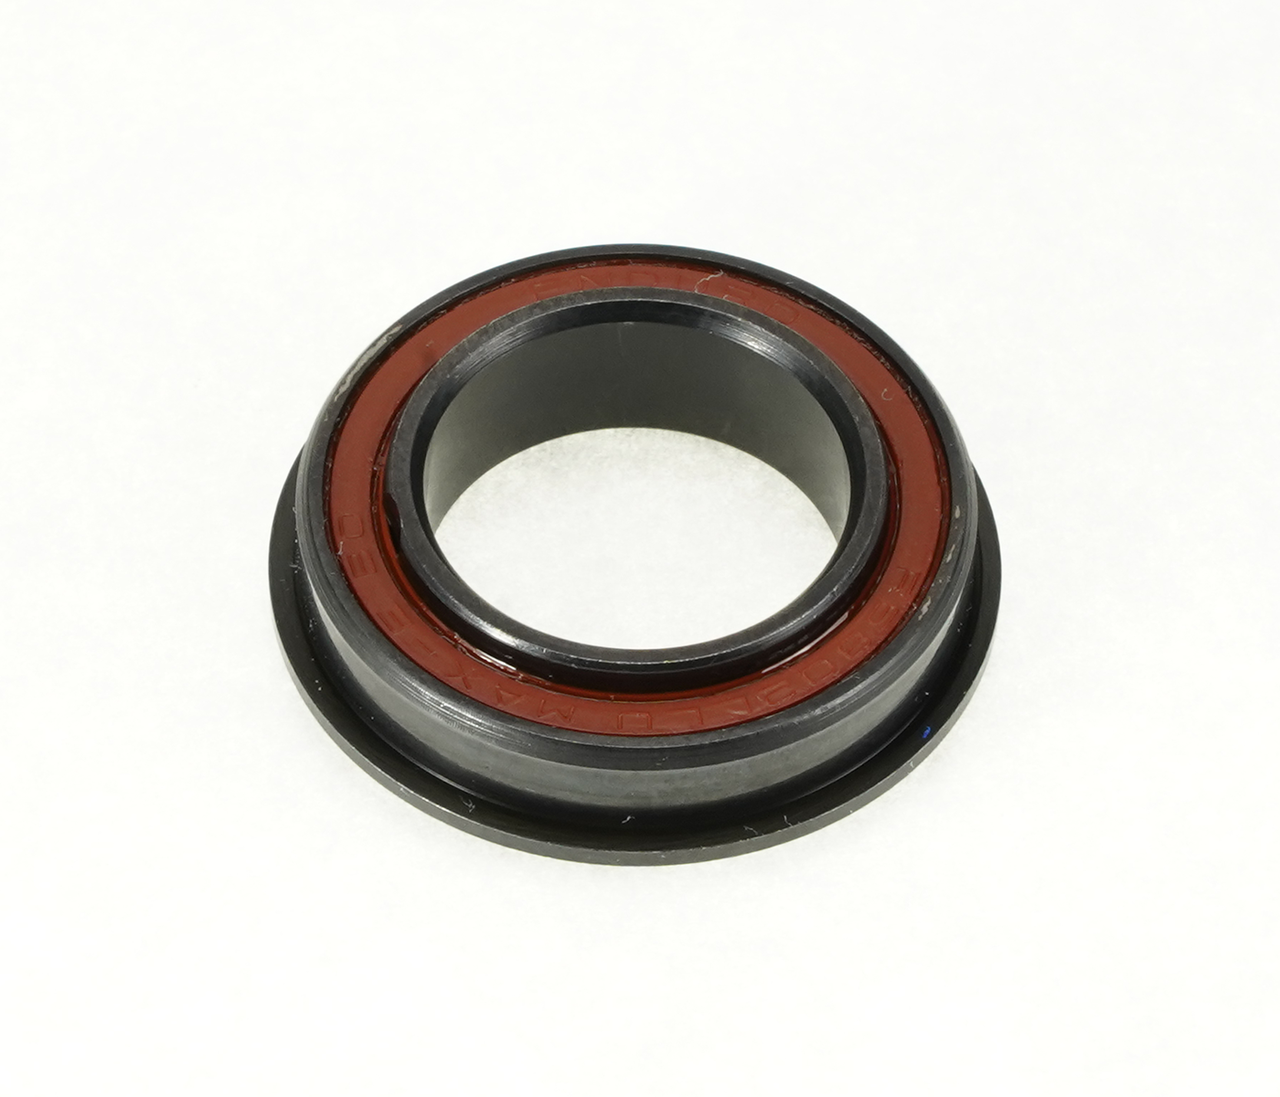 F6802 LLU MAX-E BO - Flanged, Extended-Race, MAX-Design, Black-Oxide,  ABEC-3, radial suspension bearing - 15mm x 24/26mm x 5/7mm